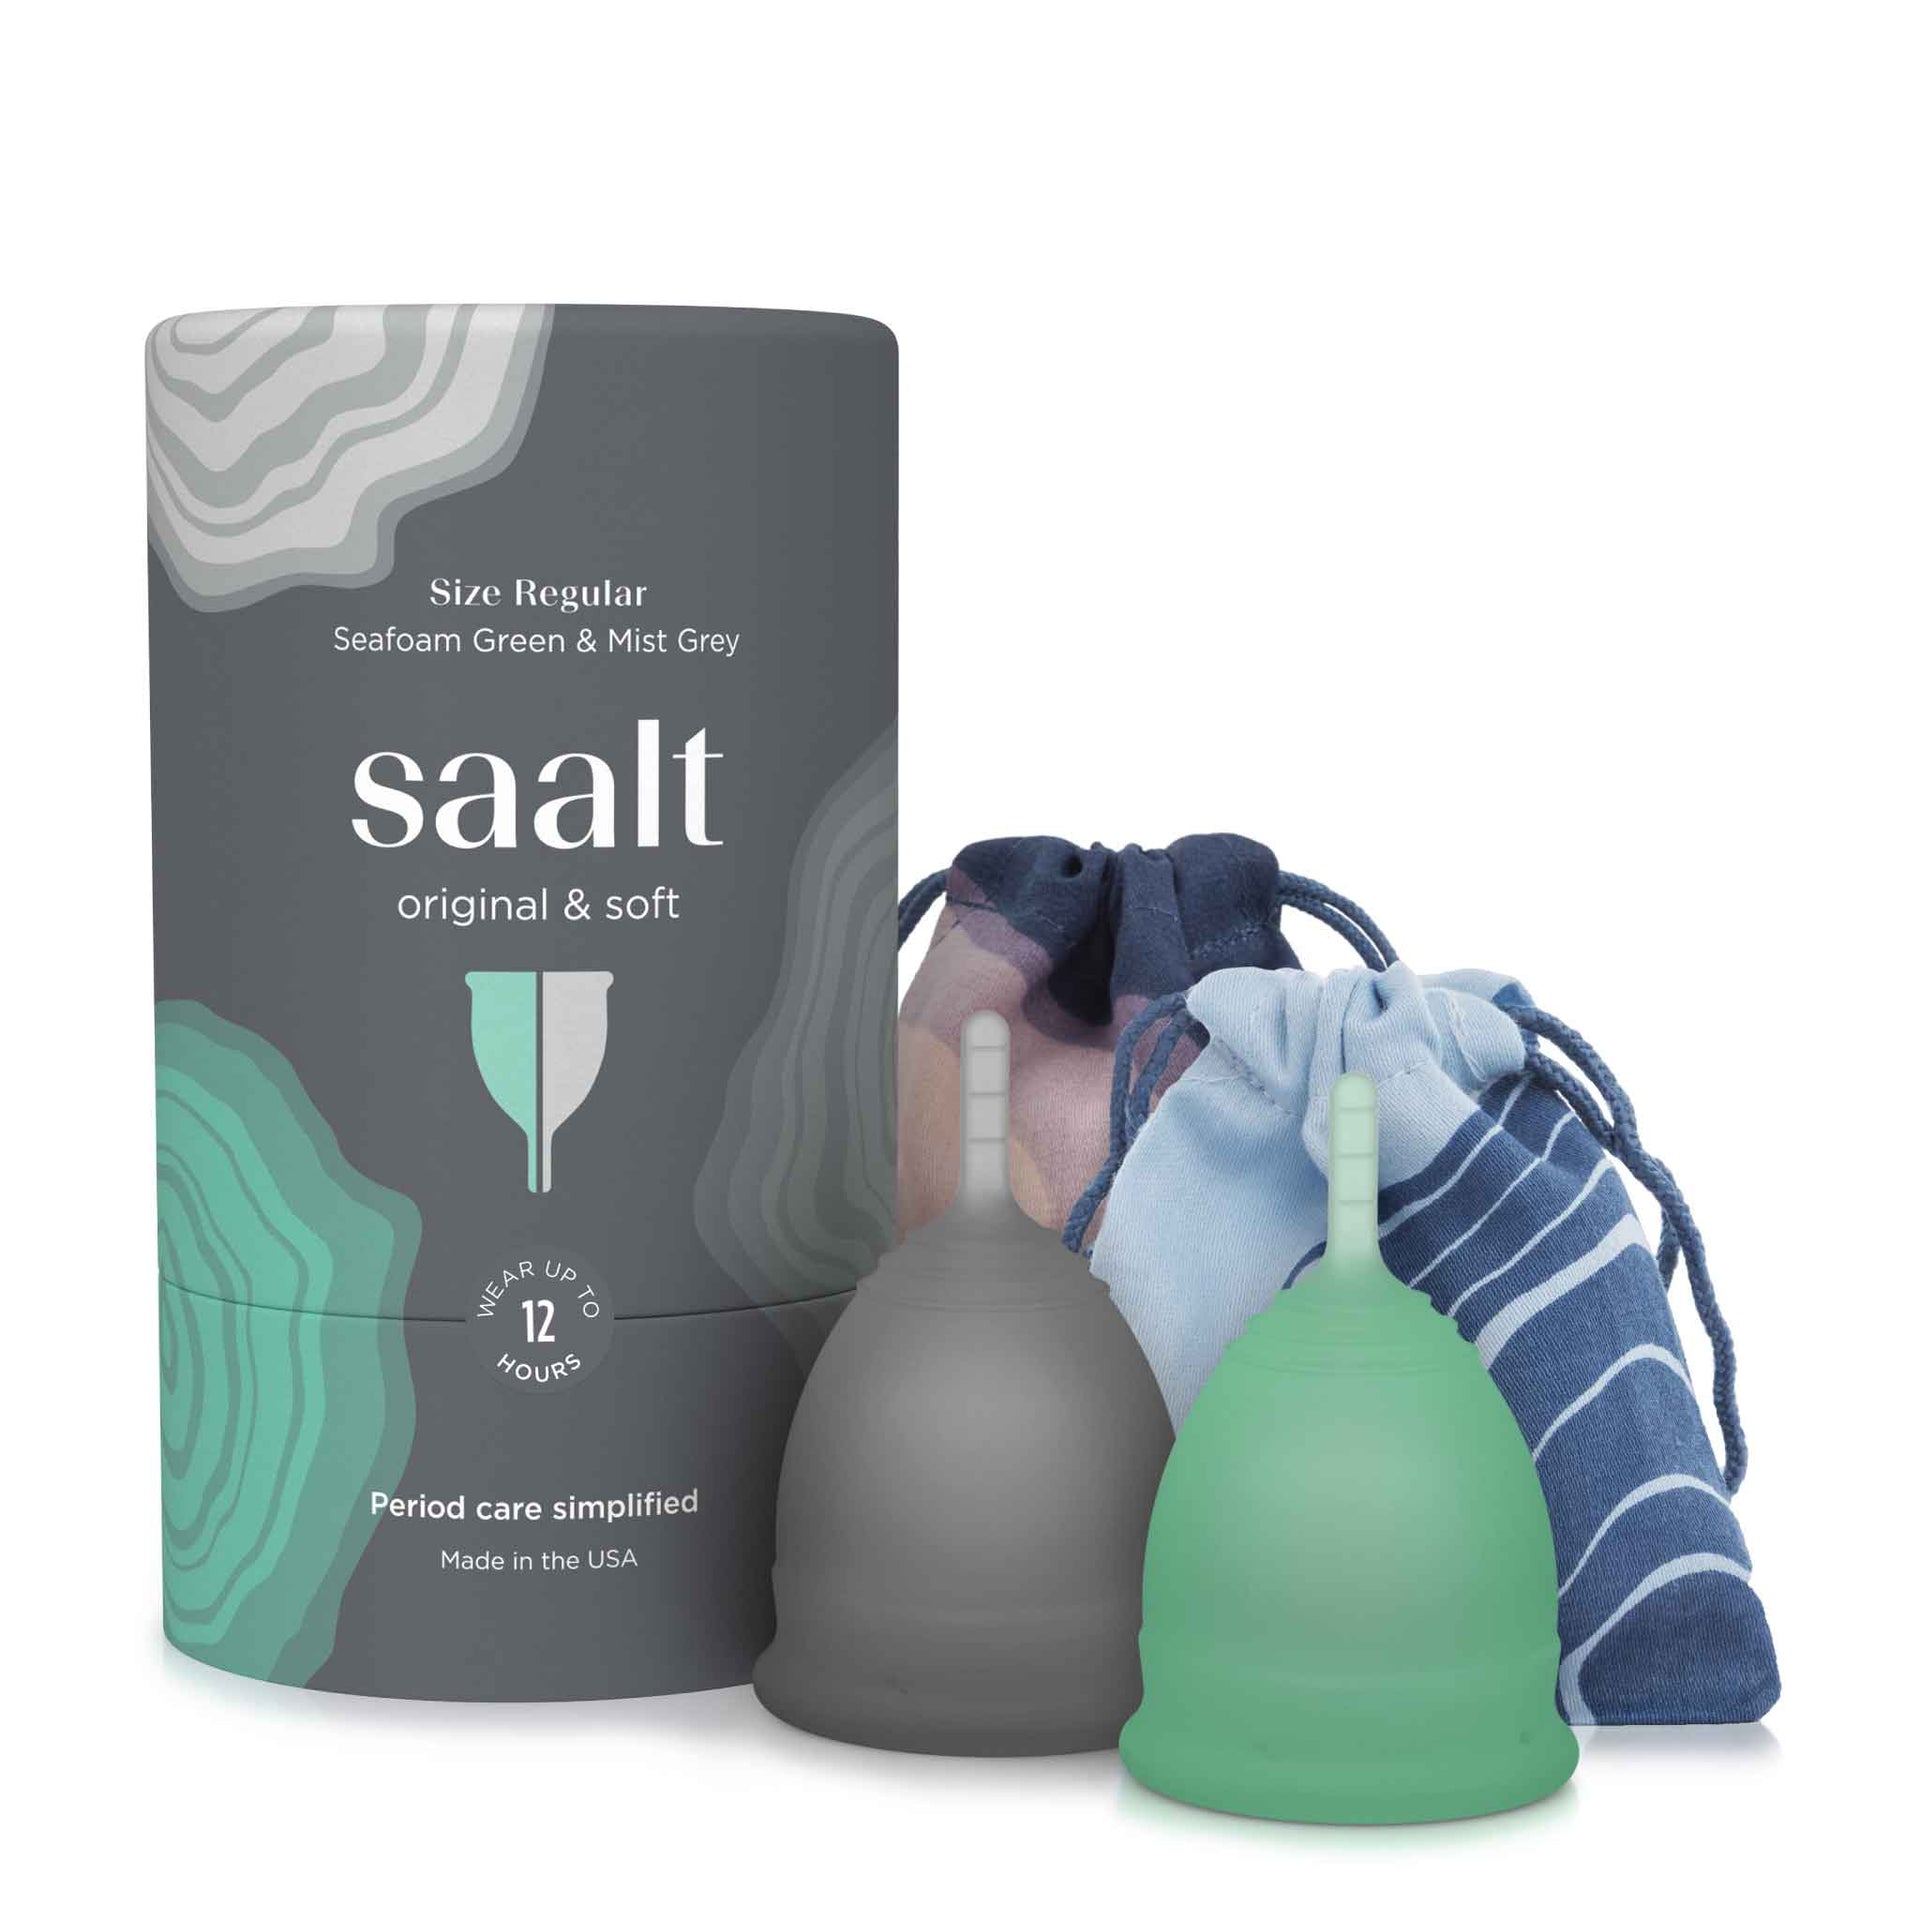 Saalt Period Care 101: Period Products - You've Got Options! 